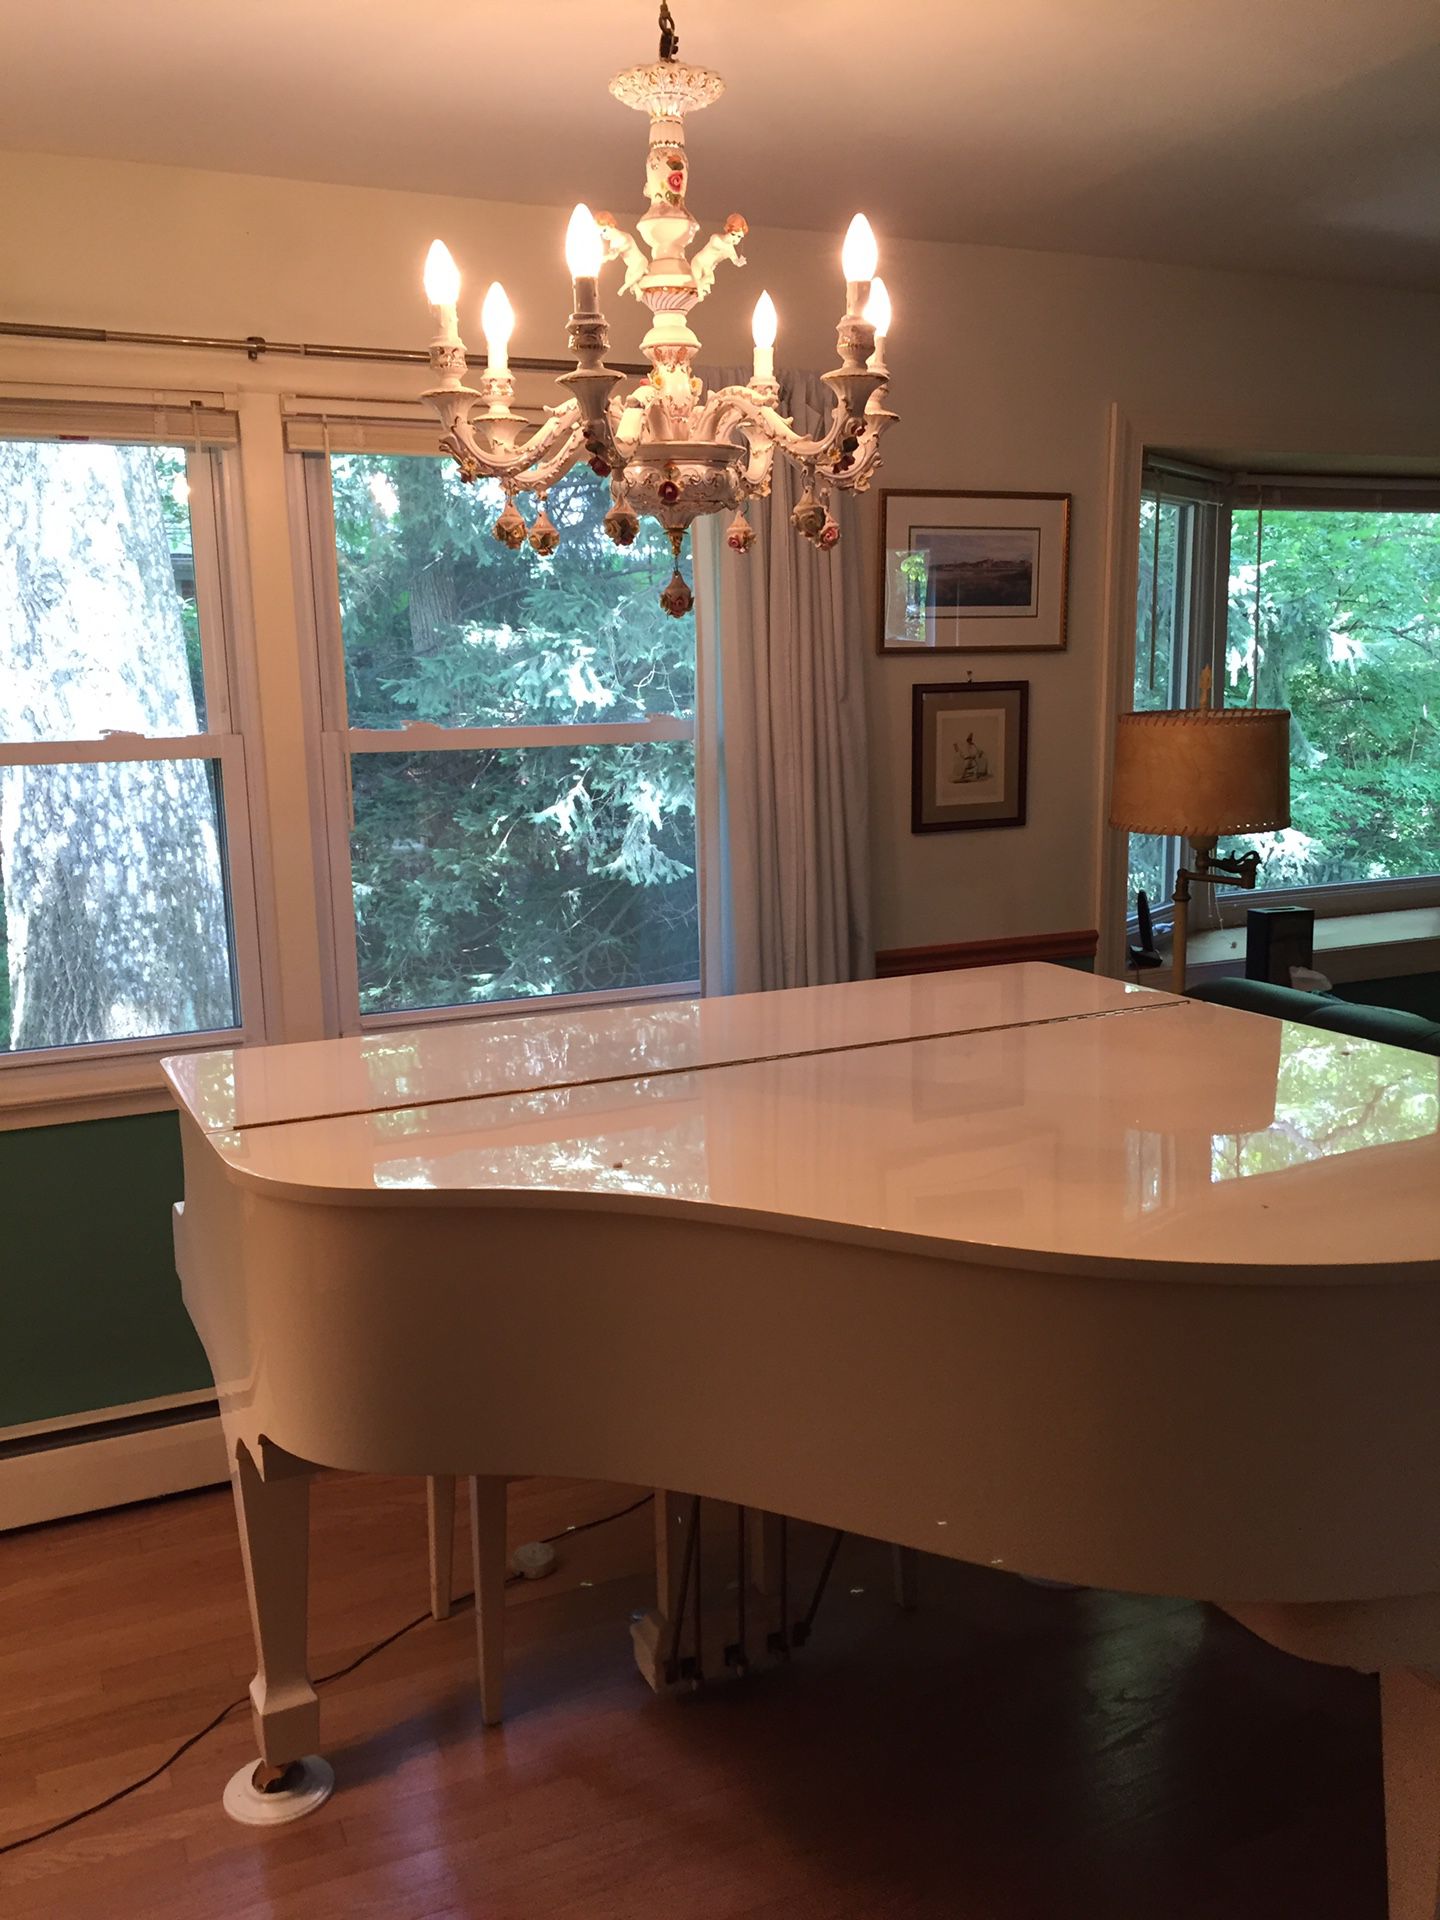 Baby Grand Piano with Capodimonte chandelier